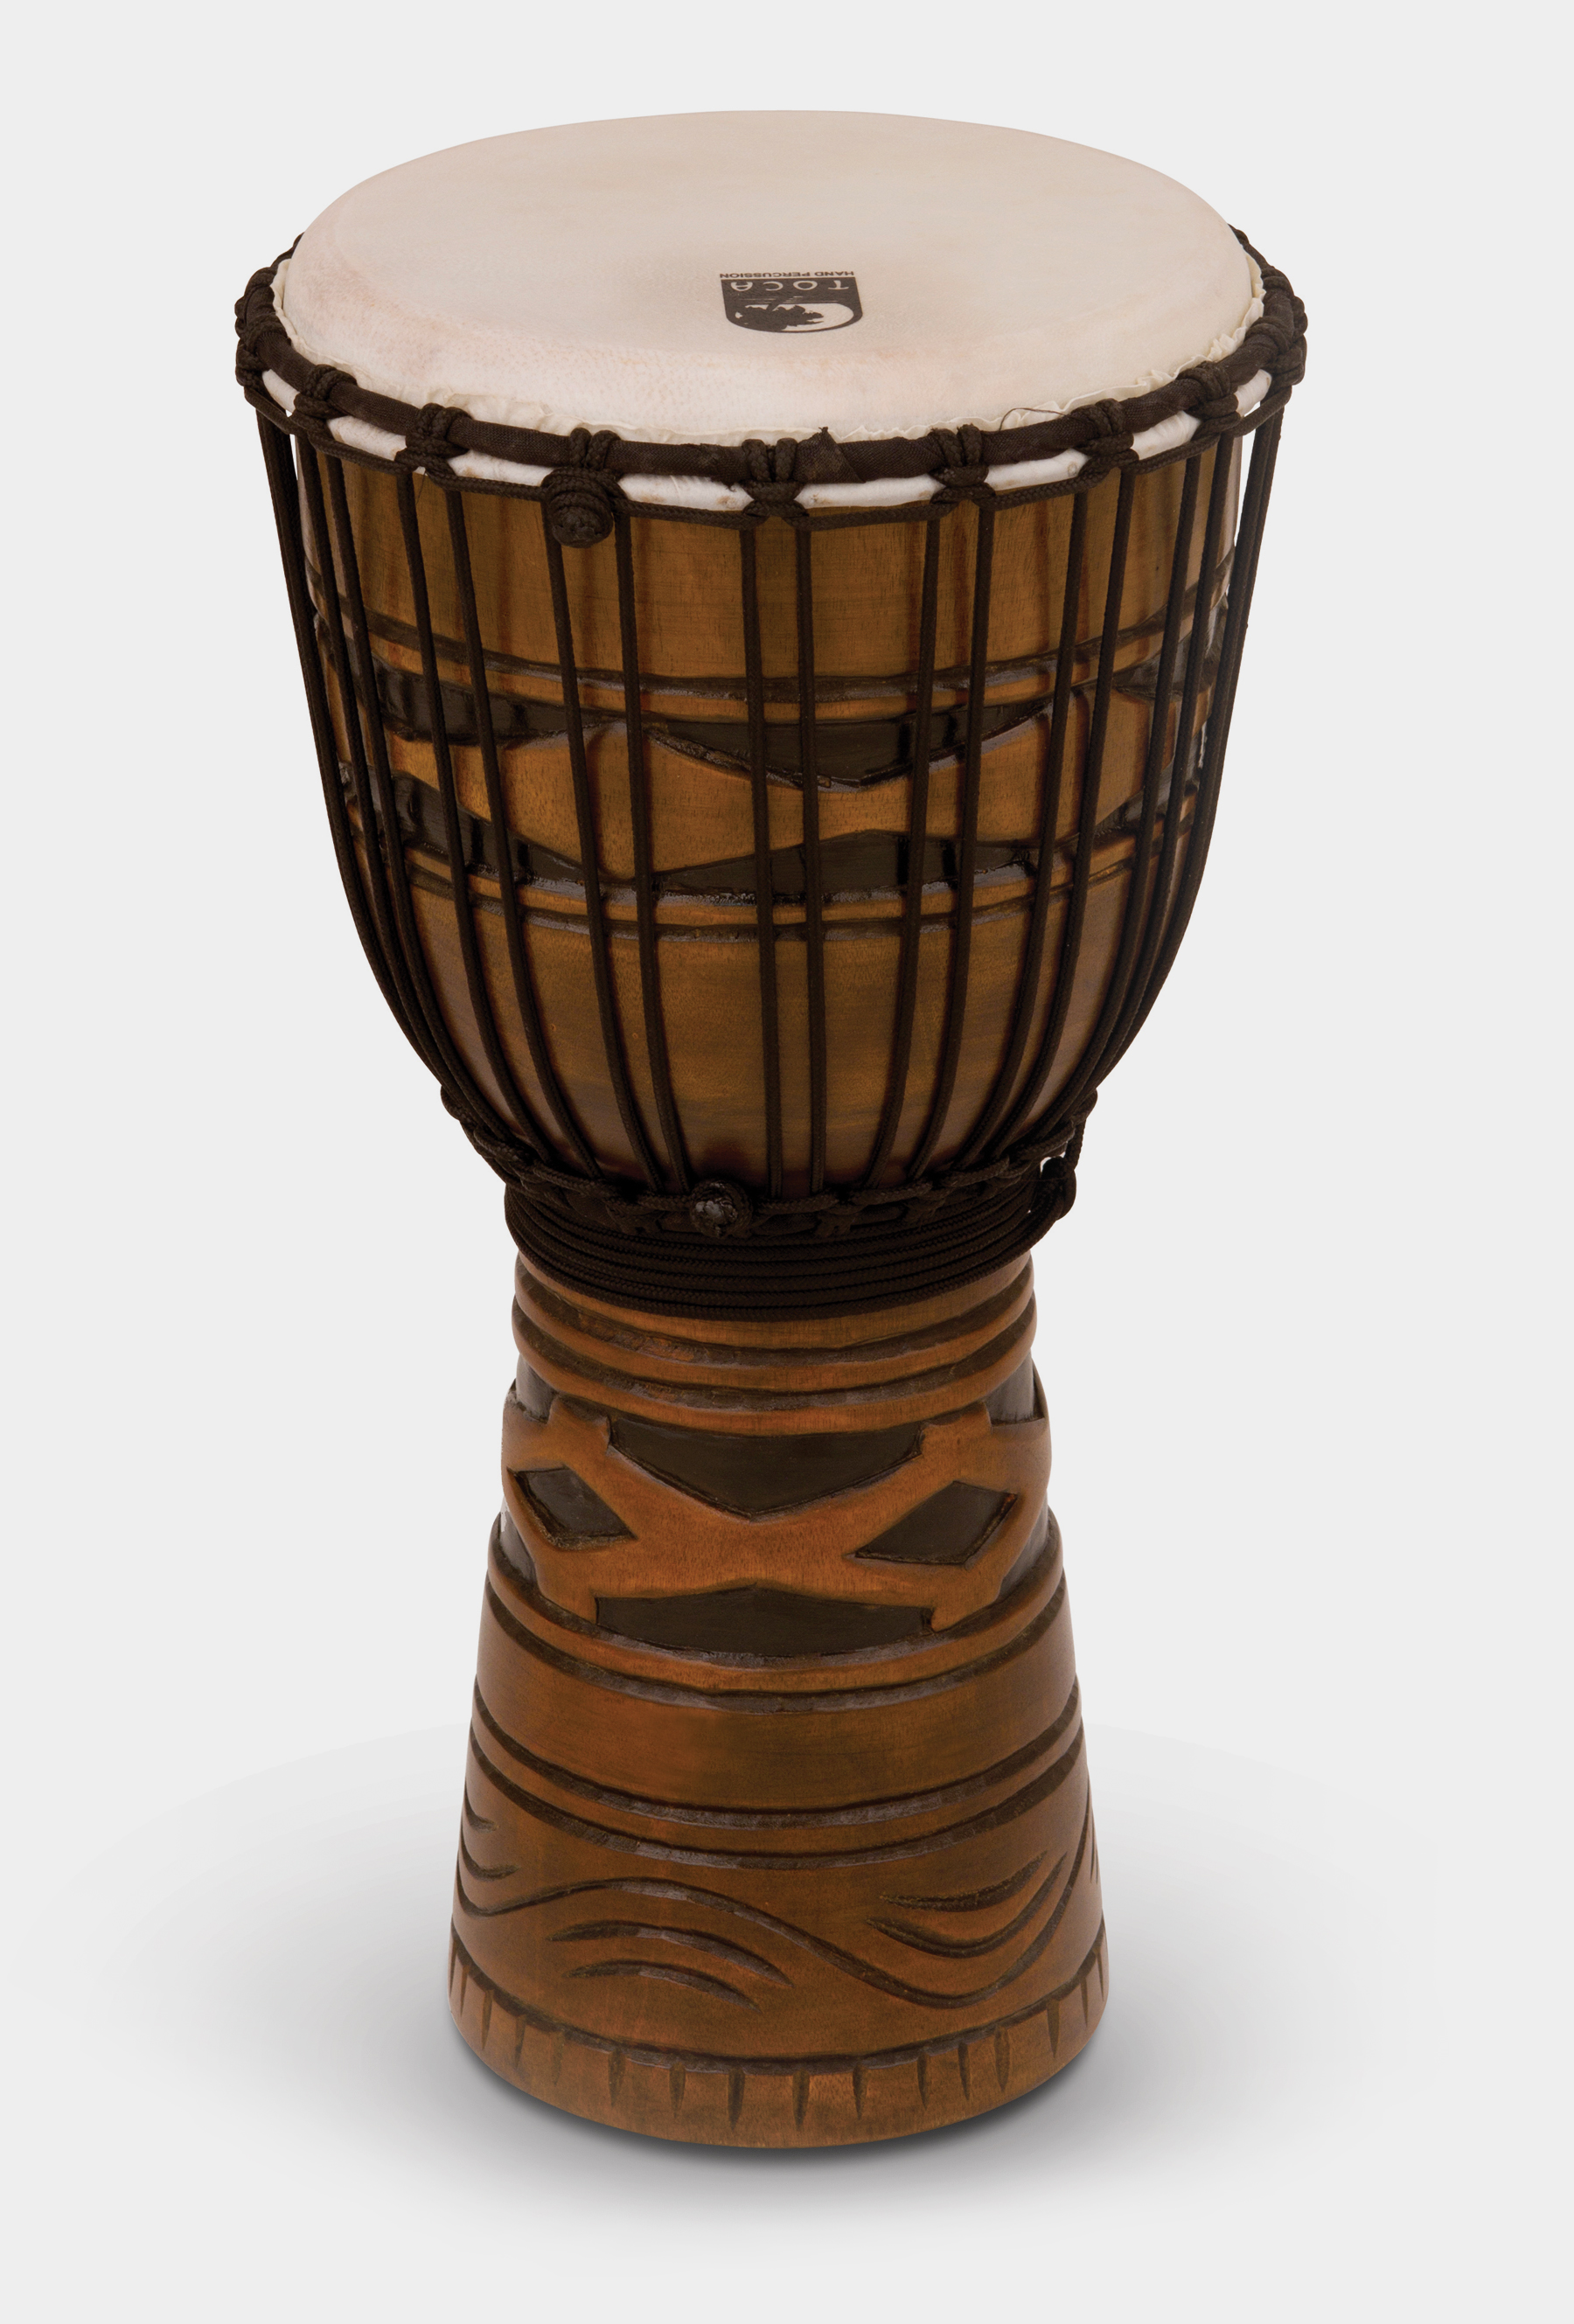 Toca Percussion Origins Djembe TODJ-10AM, 10, African Mask #AM